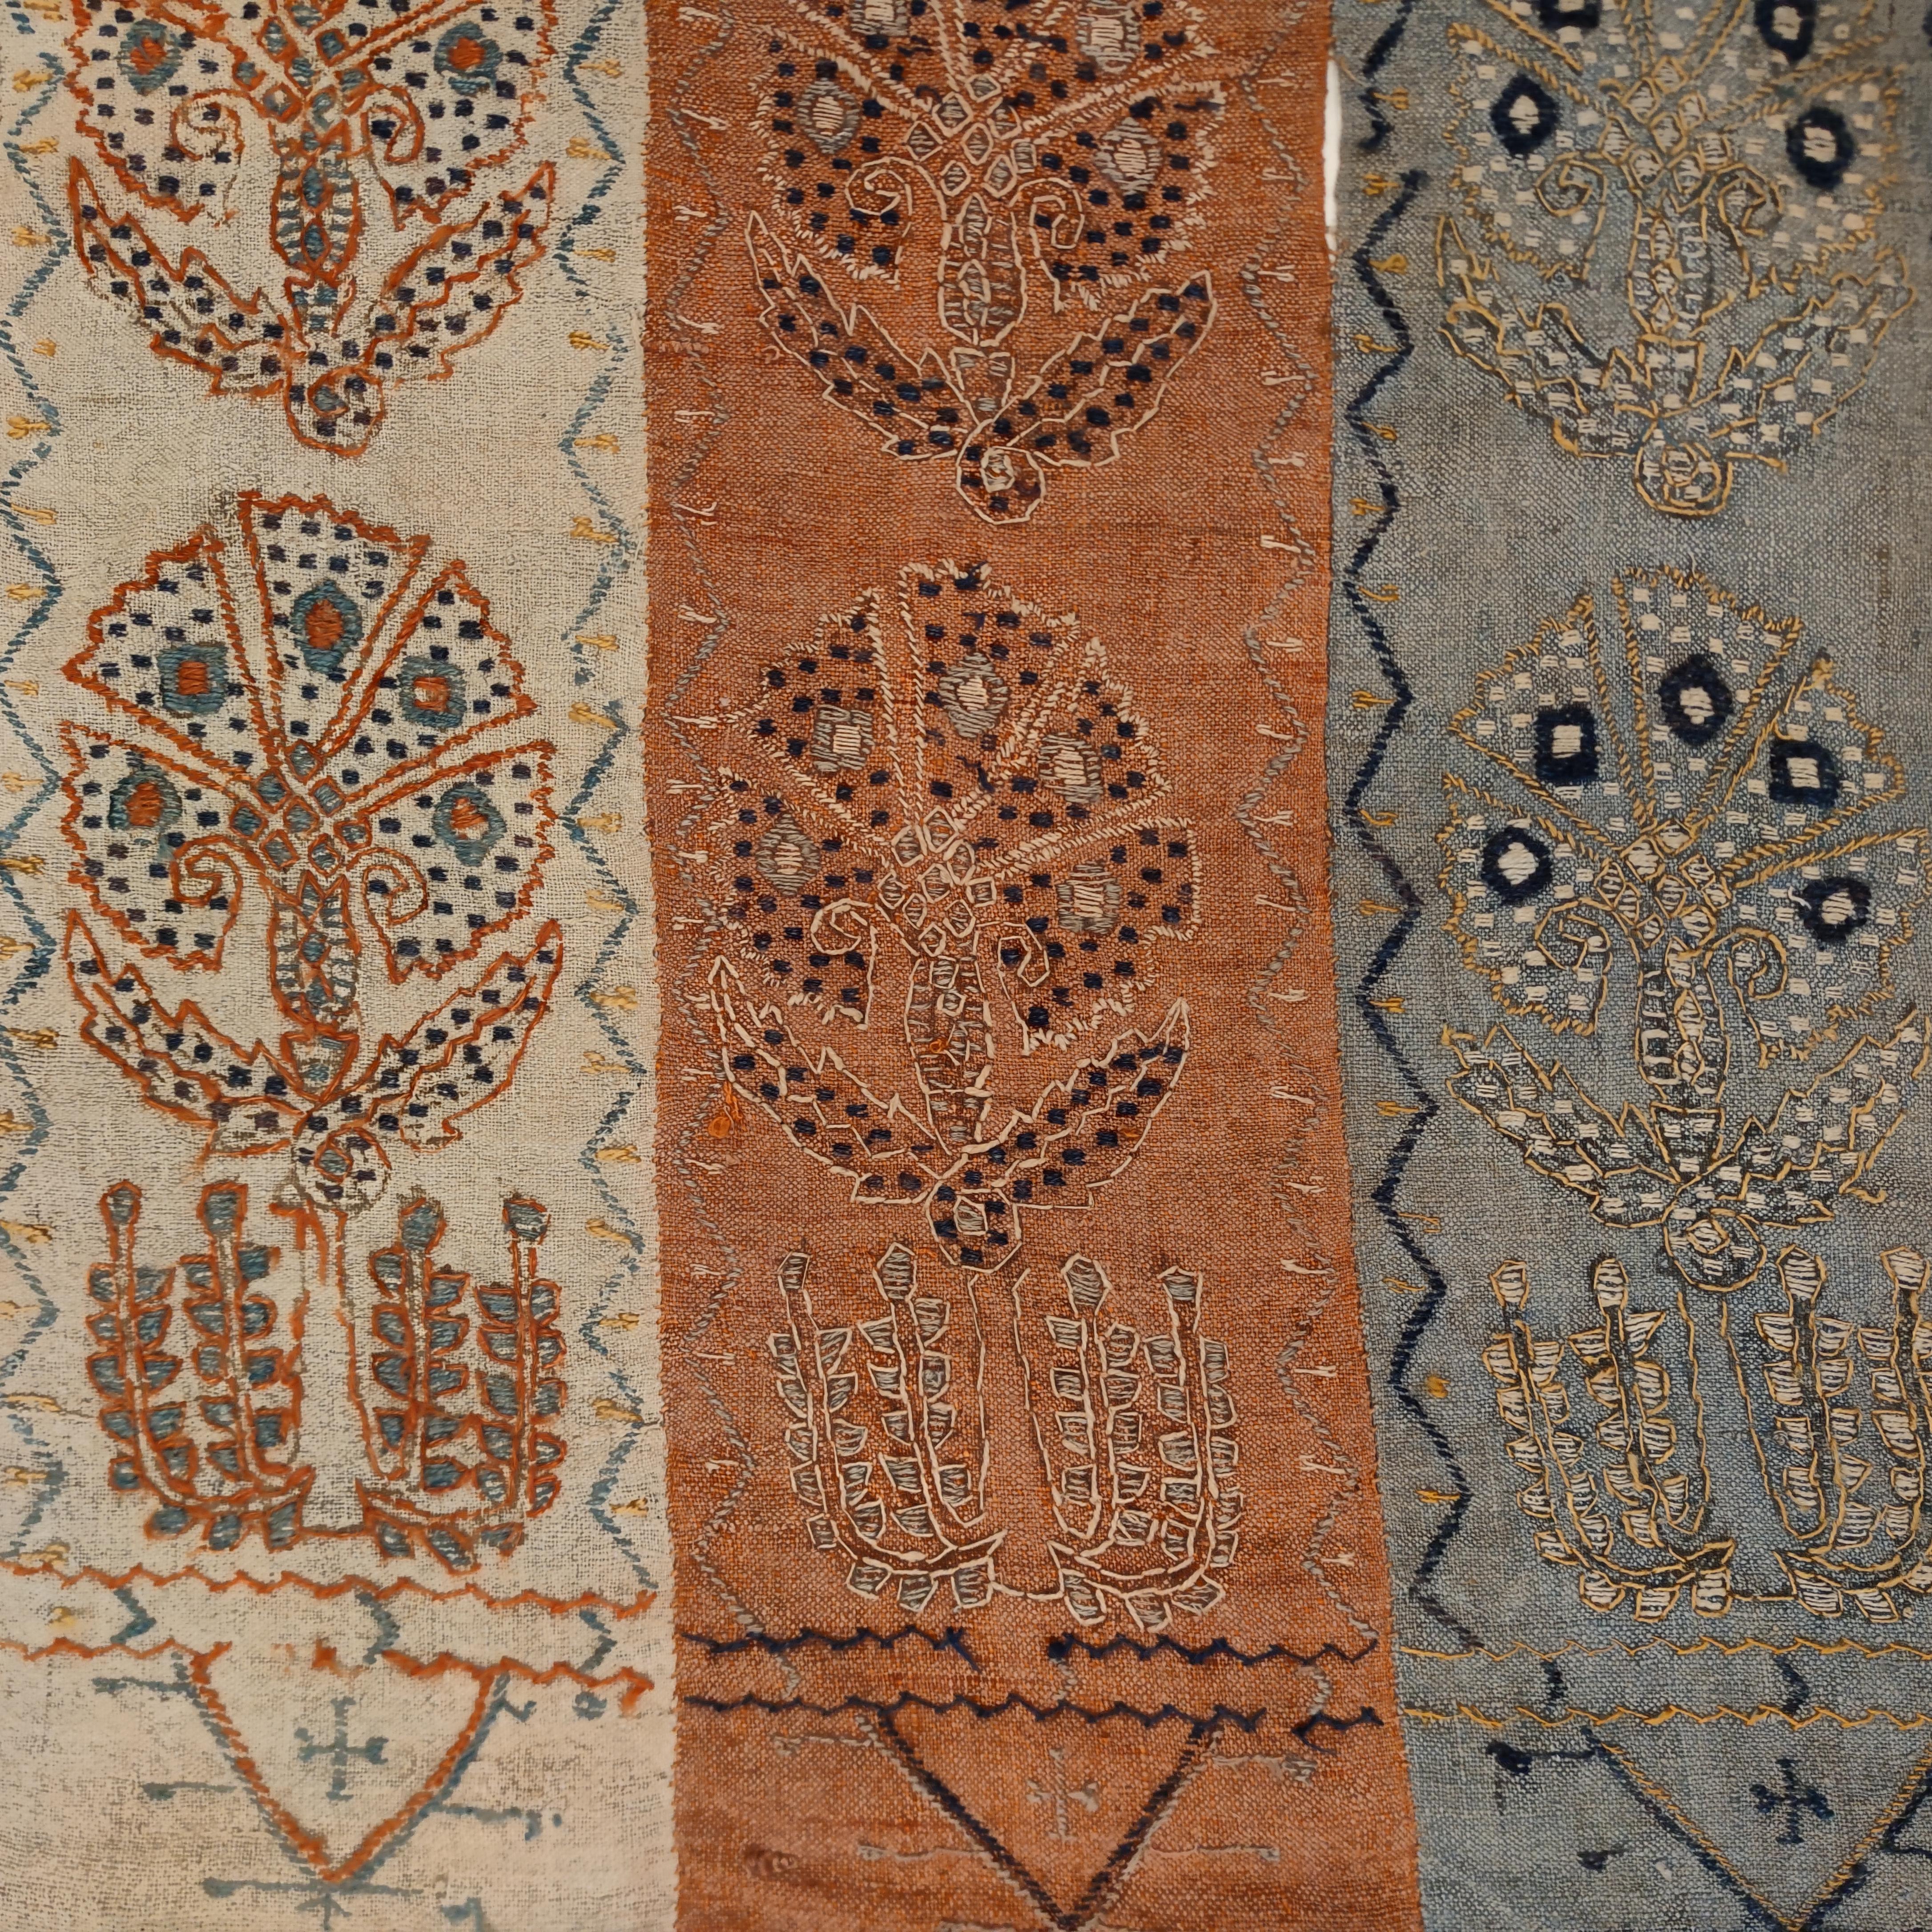 Perdehs were used as tent dividers by the Kurdish tribes of Eastern Anatolia. Each flat-woven wool panel is woven individually in a colour of choice, and is typically embellished with geometric motifs characteristic of the Kurdish tribal